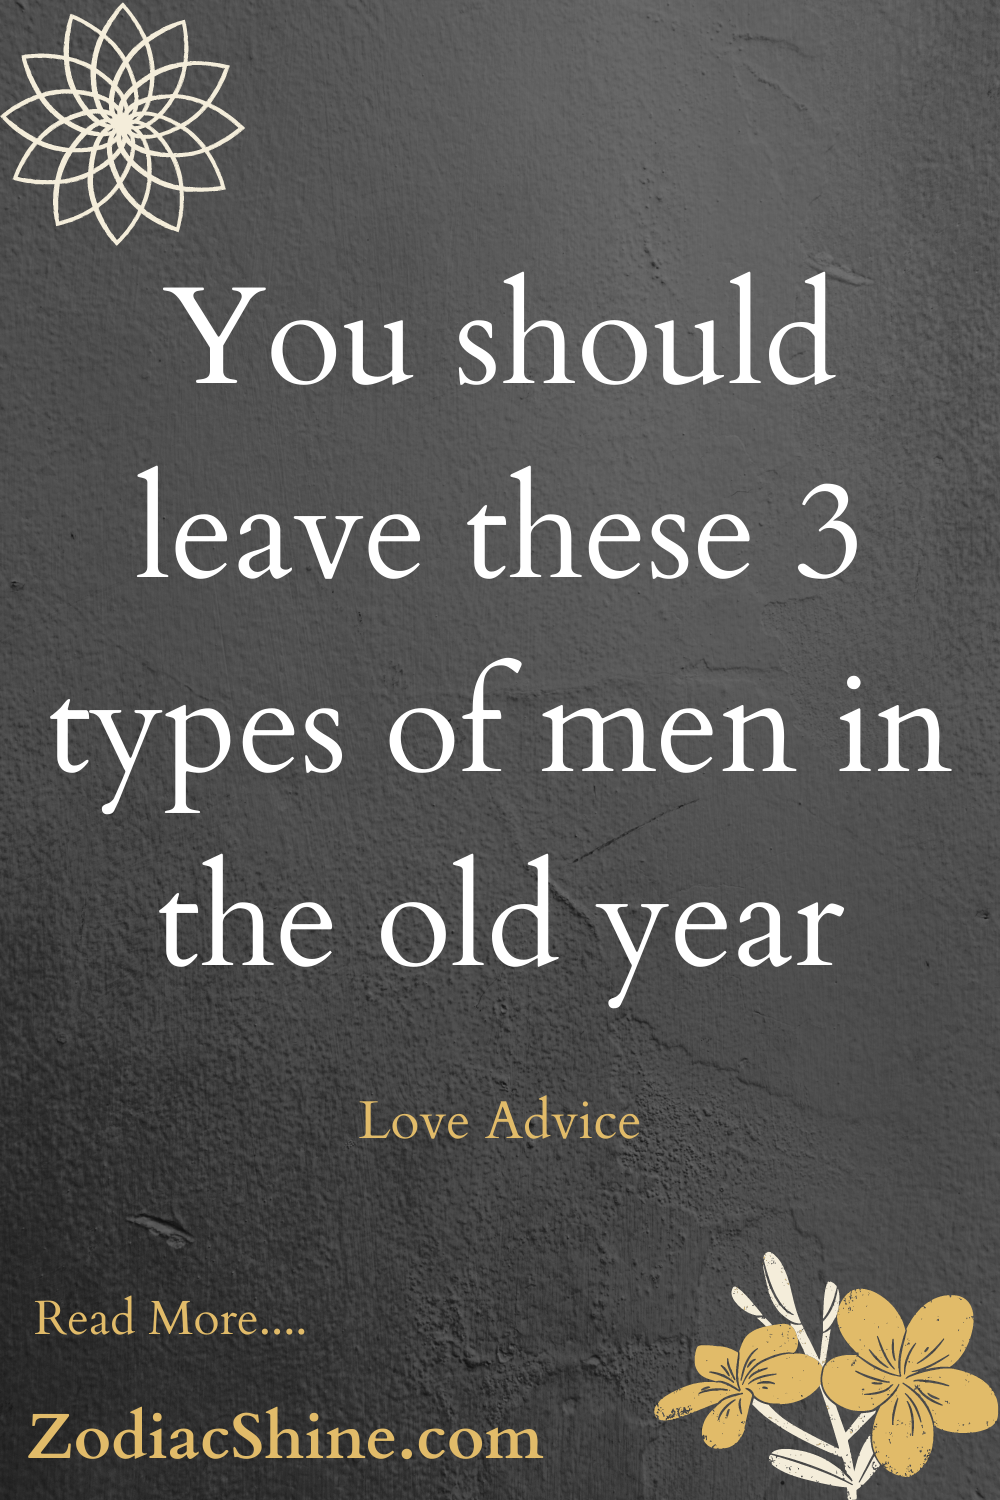 You should leave these 3 types of men in the old year